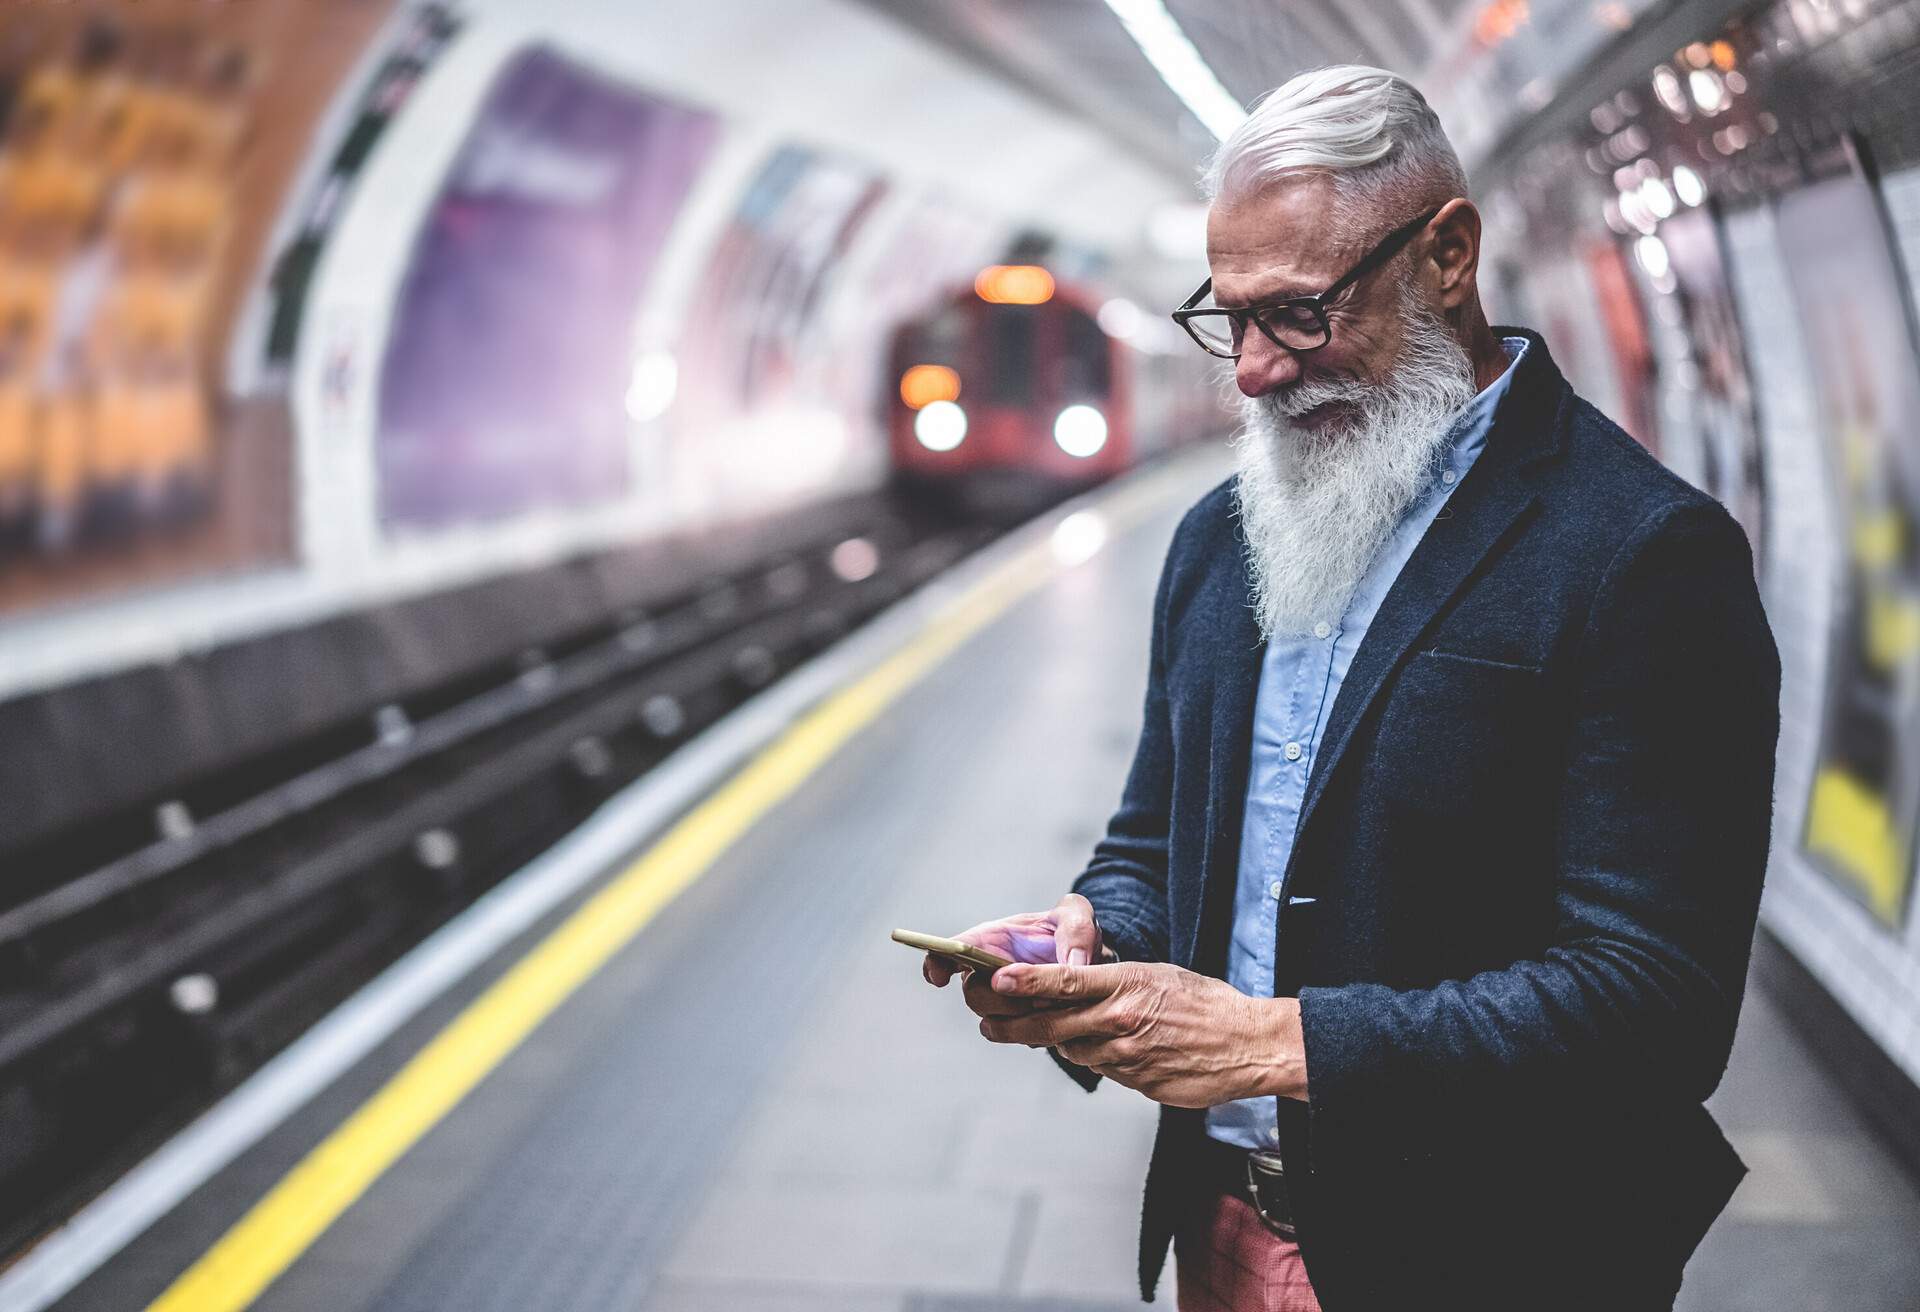 A senior citizen wearing formal attire smiles while glancing at his smartphone in the subway while he waits for the train.